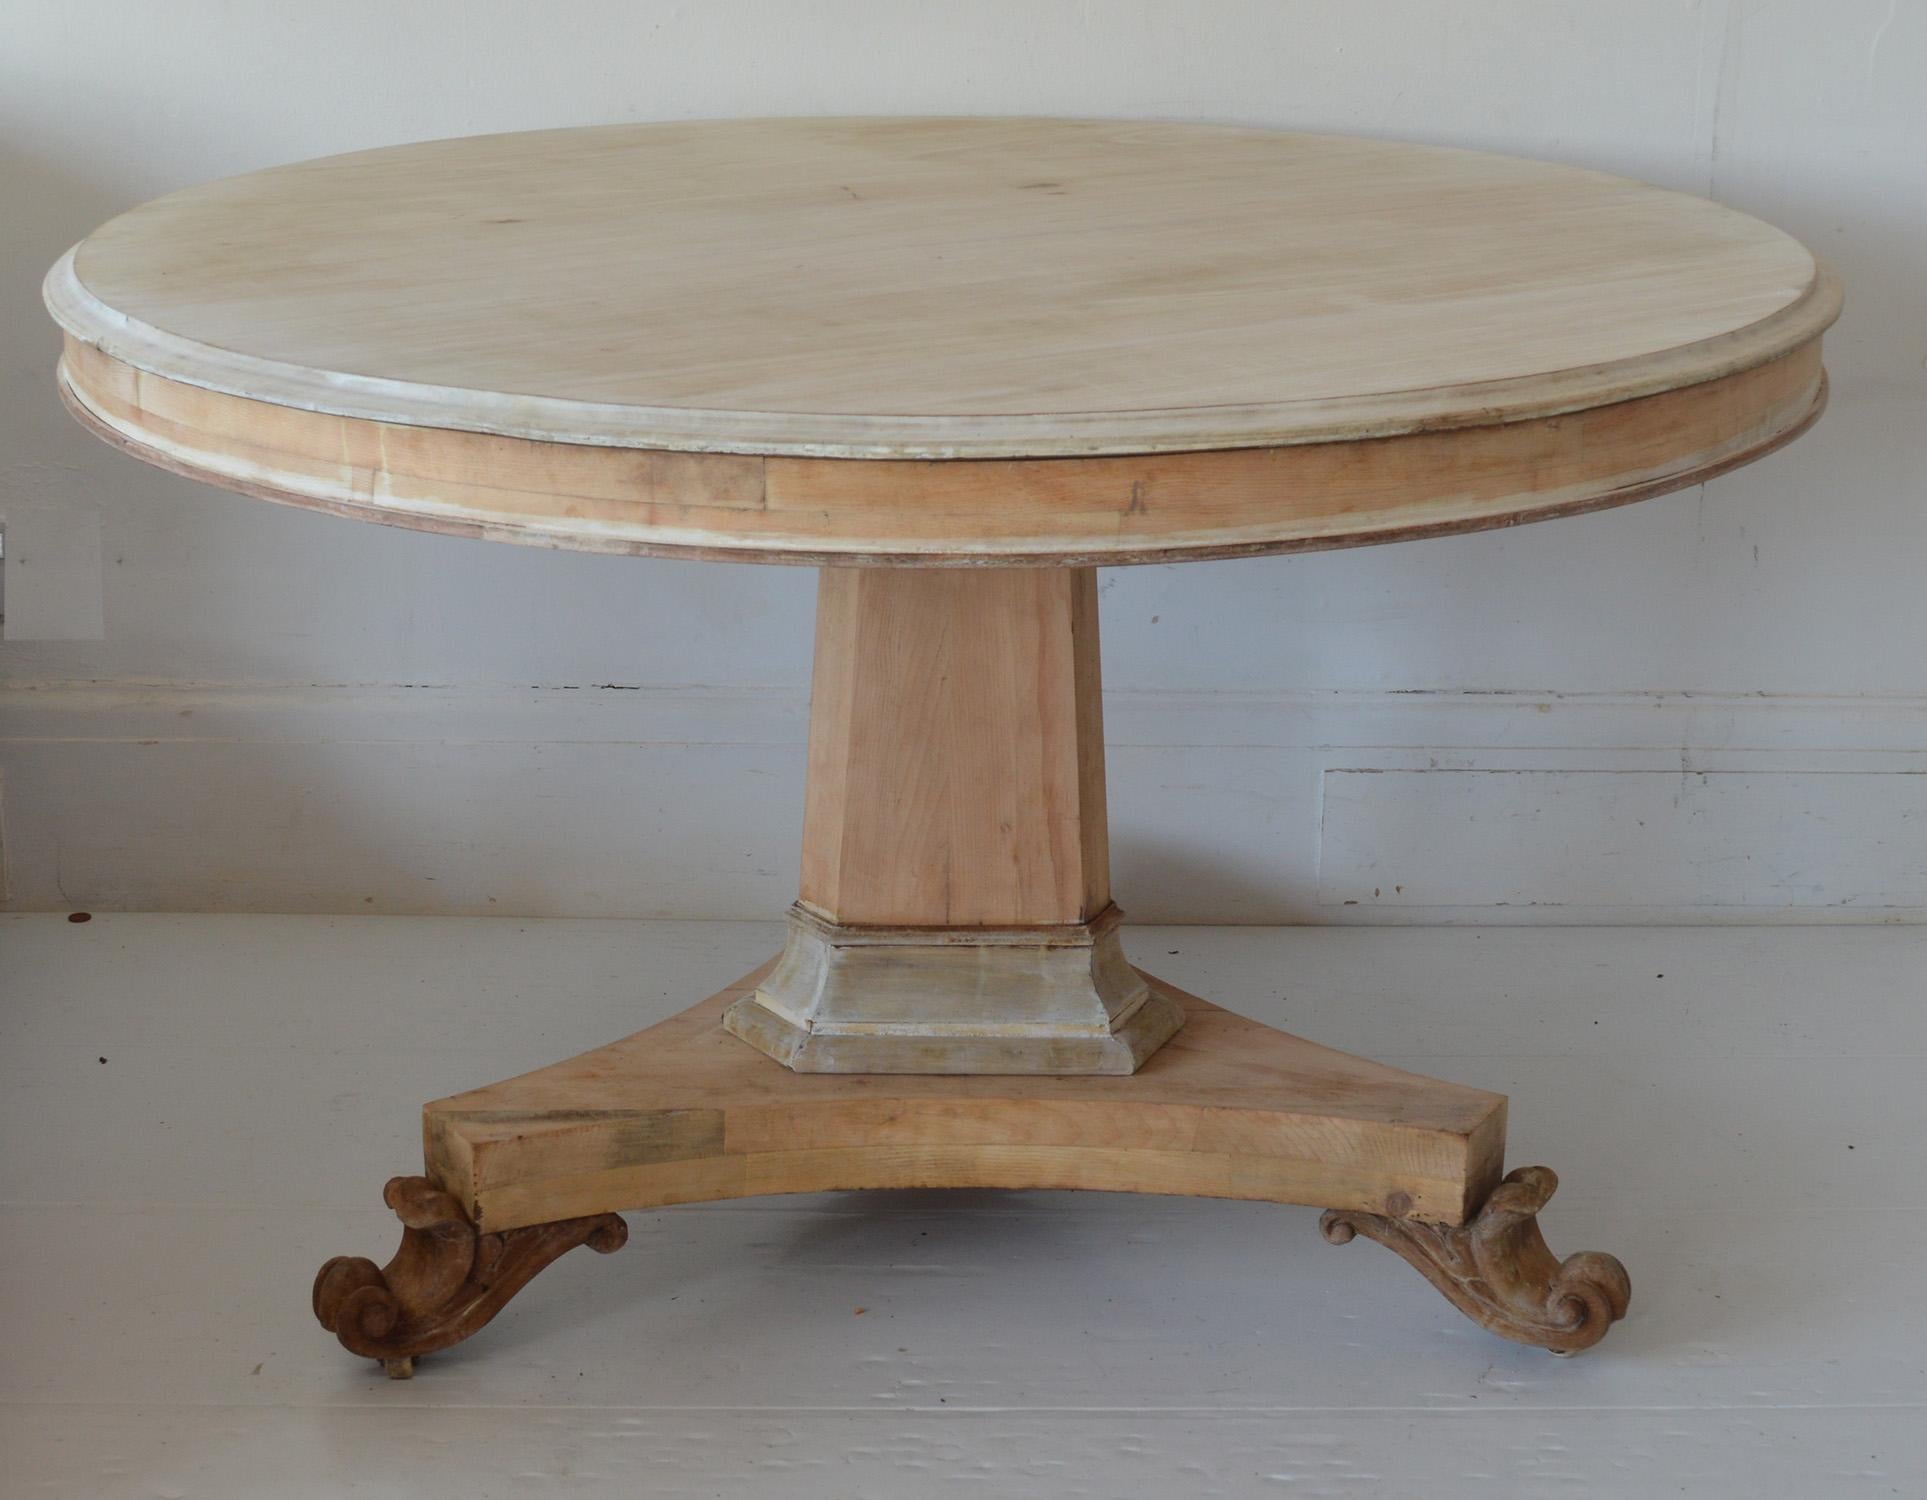 Fabulous large round table. Made from bleached Honduras mahogany and pine.

Original castors and hardware. The top does tip.

Great simple lines. I particularly like the carved detail on the feet.

I have chosen not to lacquer or wax the